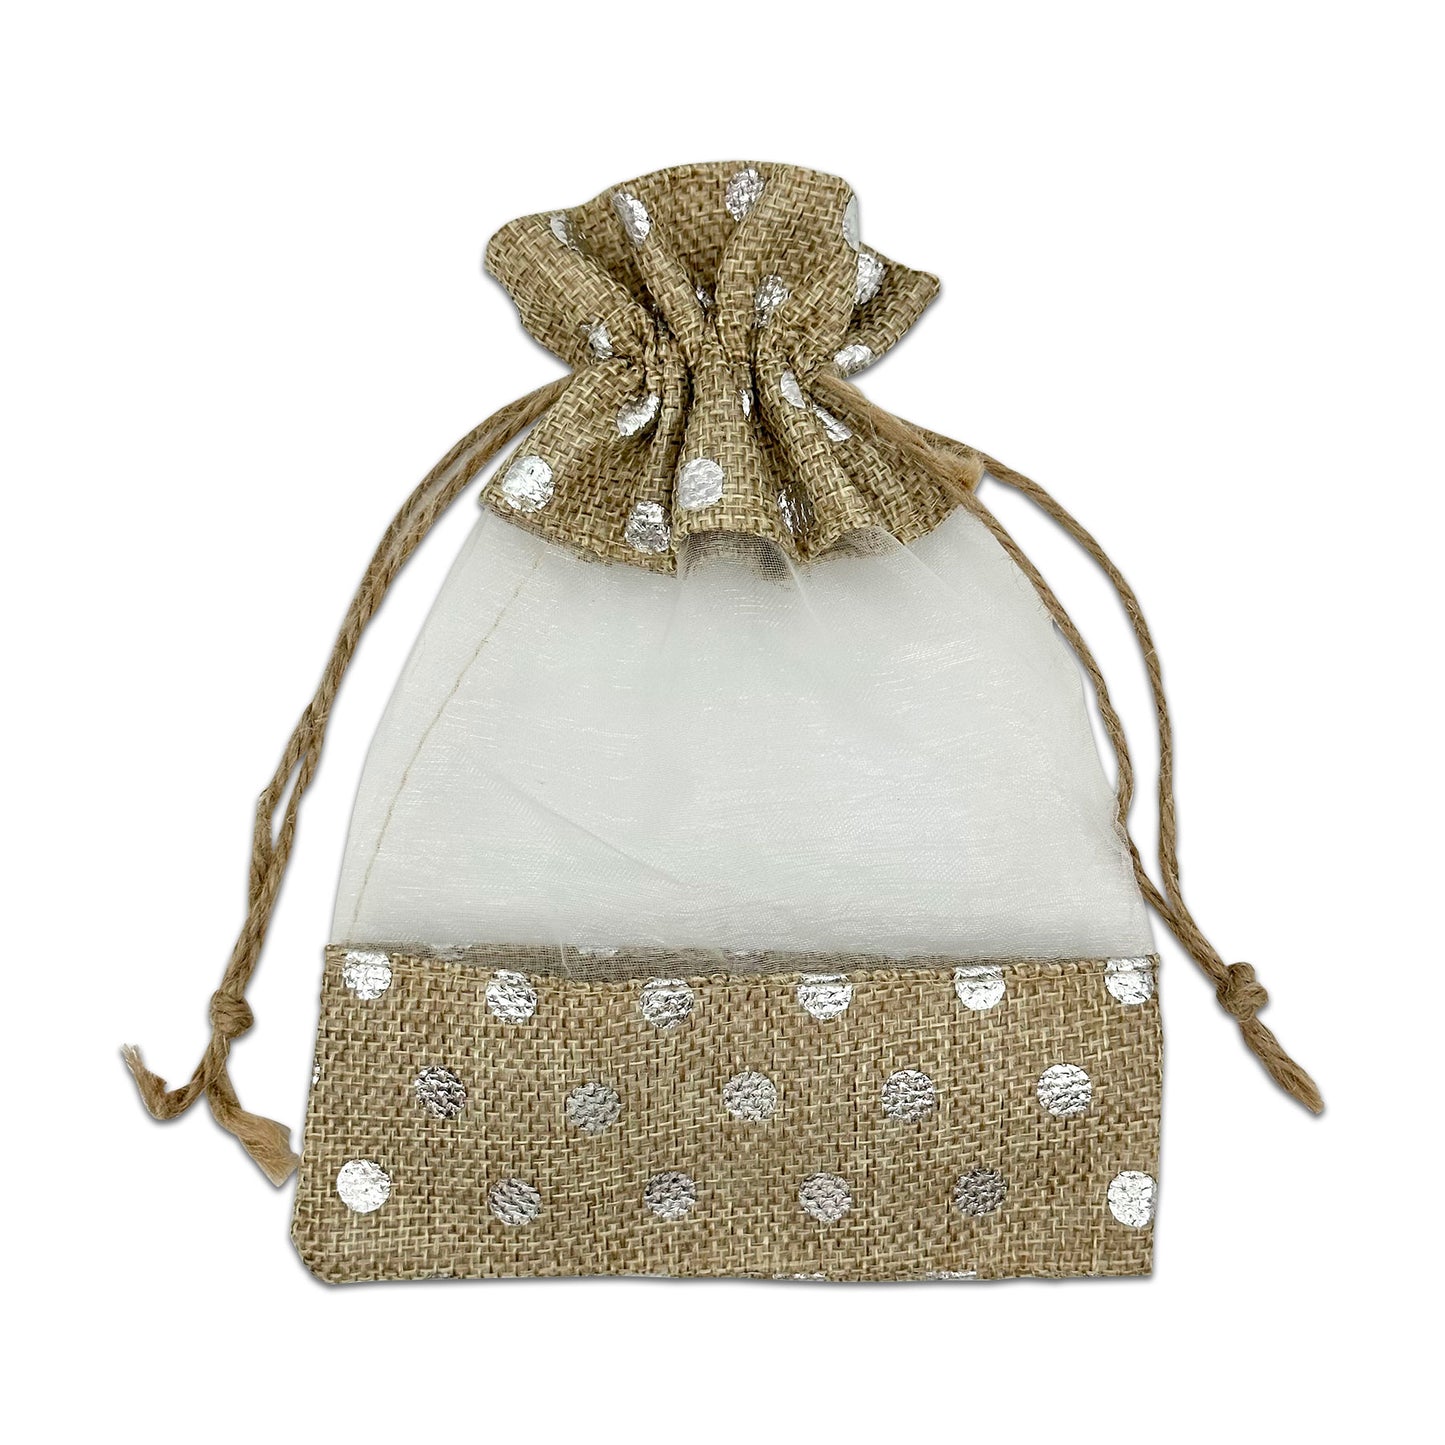 5" x 7" Beige with Silver Polka Dot Linen Burlap and Sheer Organza Gift Bag